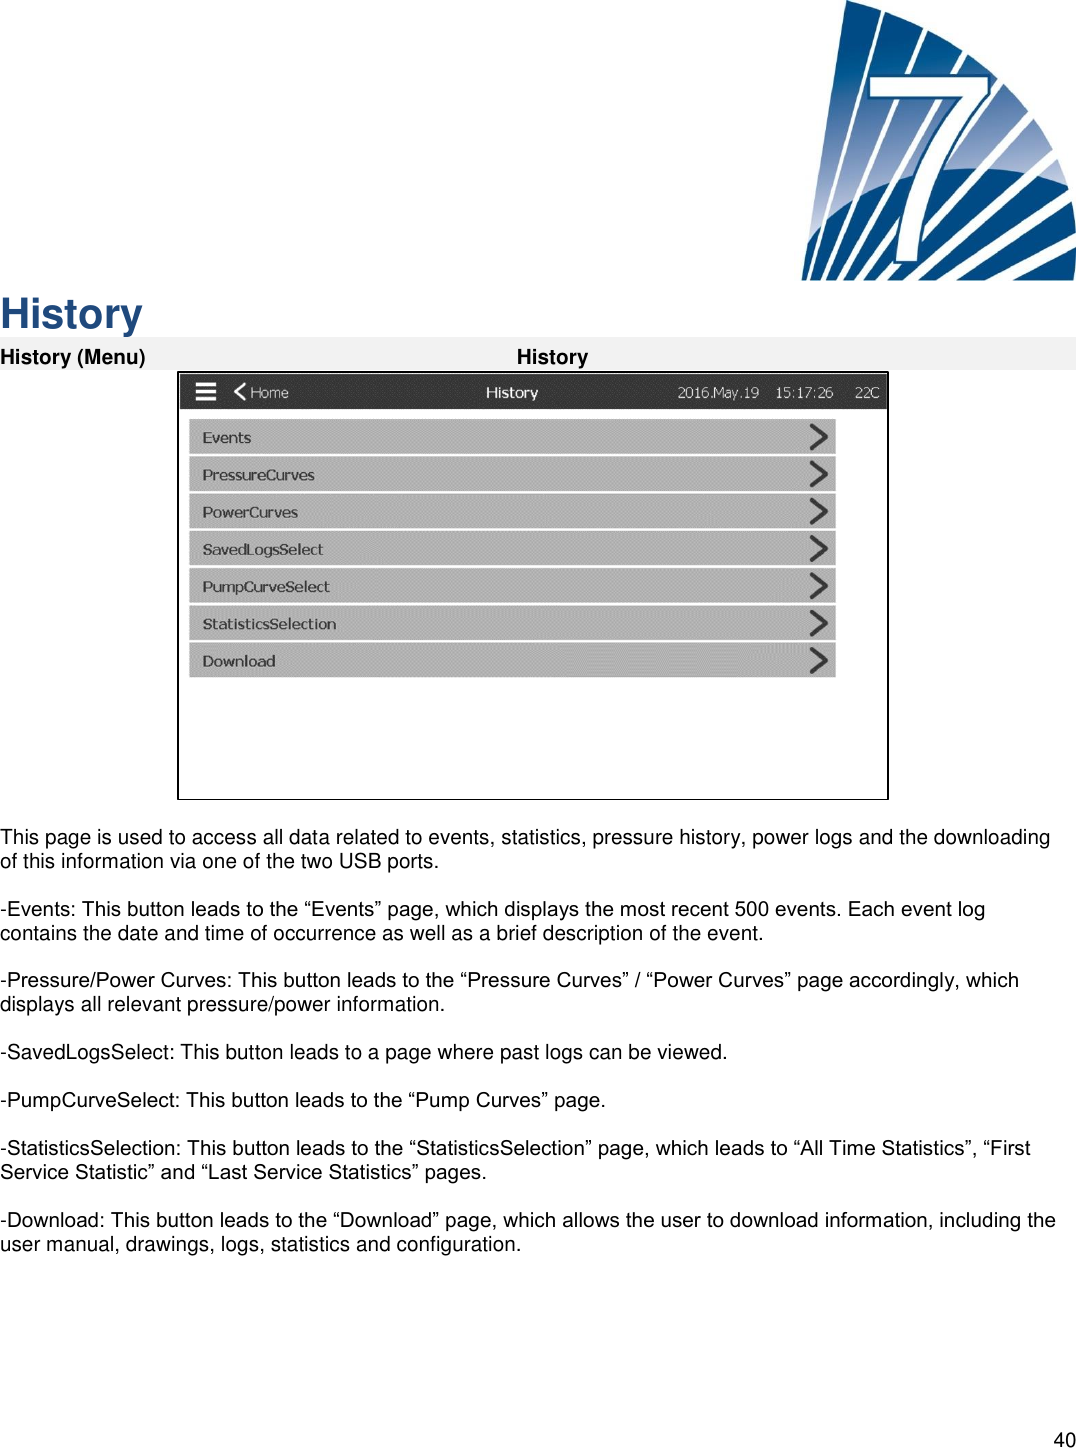    40      History History (Menu) History   This page is used to access all data related to events, statistics, pressure history, power logs and the downloading of this information via one of the two USB ports.  -Events: This button leads to the “Events” page, which displays the most recent 500 events. Each event log contains the date and time of occurrence as well as a brief description of the event.  -Pressure/Power Curves: This button leads to the “Pressure Curves” / “Power Curves” page accordingly, which displays all relevant pressure/power information.  -SavedLogsSelect: This button leads to a page where past logs can be viewed.  -PumpCurveSelect: This button leads to the “Pump Curves” page.  -StatisticsSelection: This button leads to the “StatisticsSelection” page, which leads to “All Time Statistics”, “First Service Statistic” and “Last Service Statistics” pages.  -Download: This button leads to the “Download” page, which allows the user to download information, including the user manual, drawings, logs, statistics and configuration.     